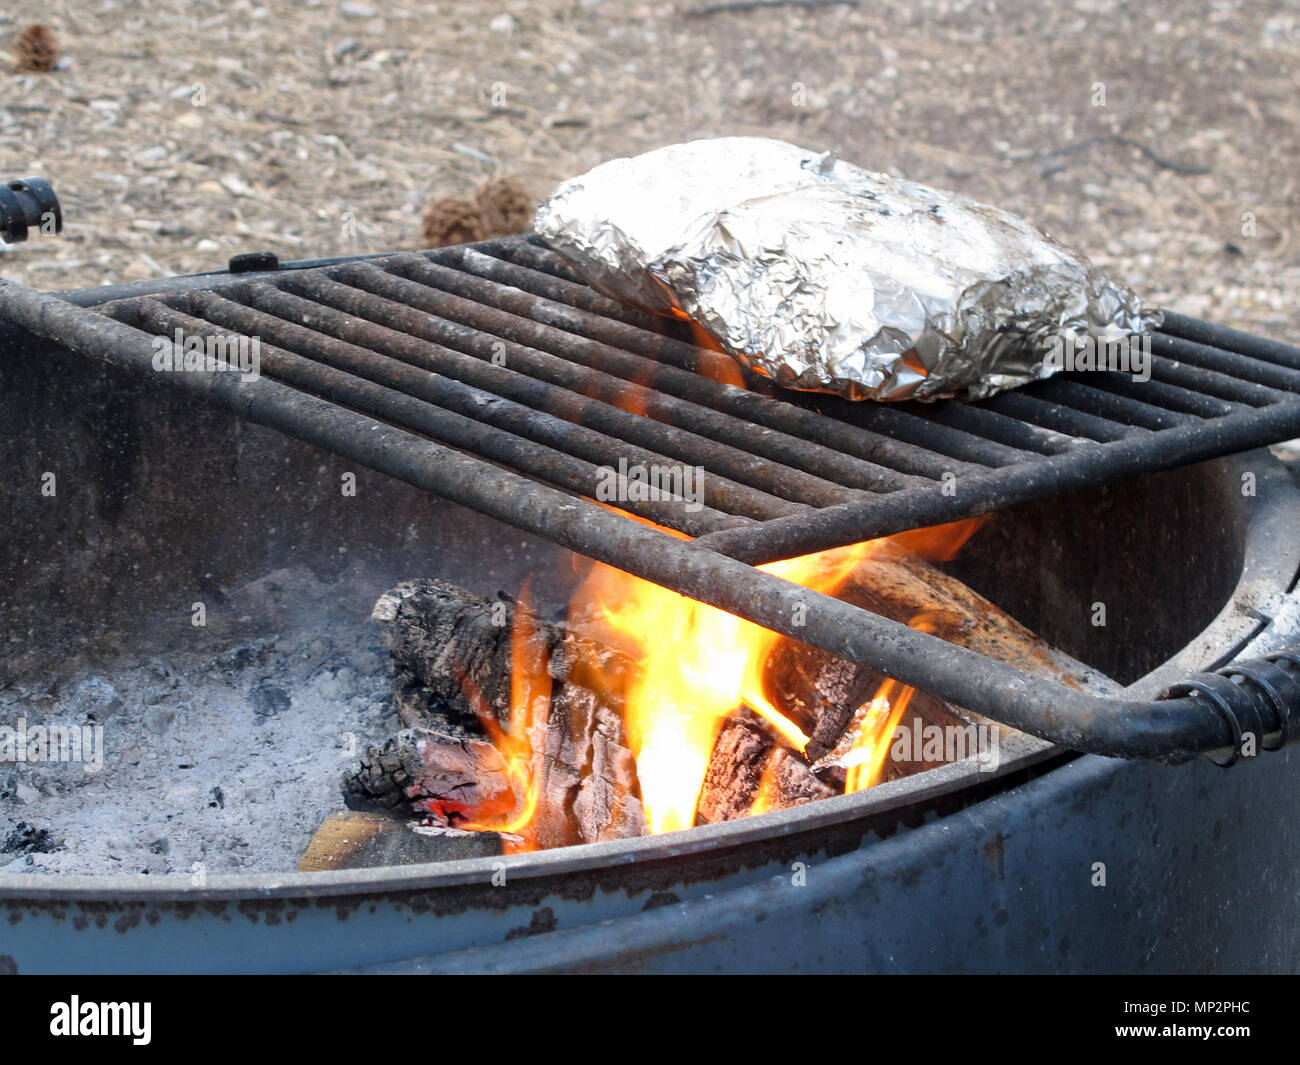 Mountain Camp Fire Cooking Foil Dinners on Grate Over Hot Pit Stock Photo